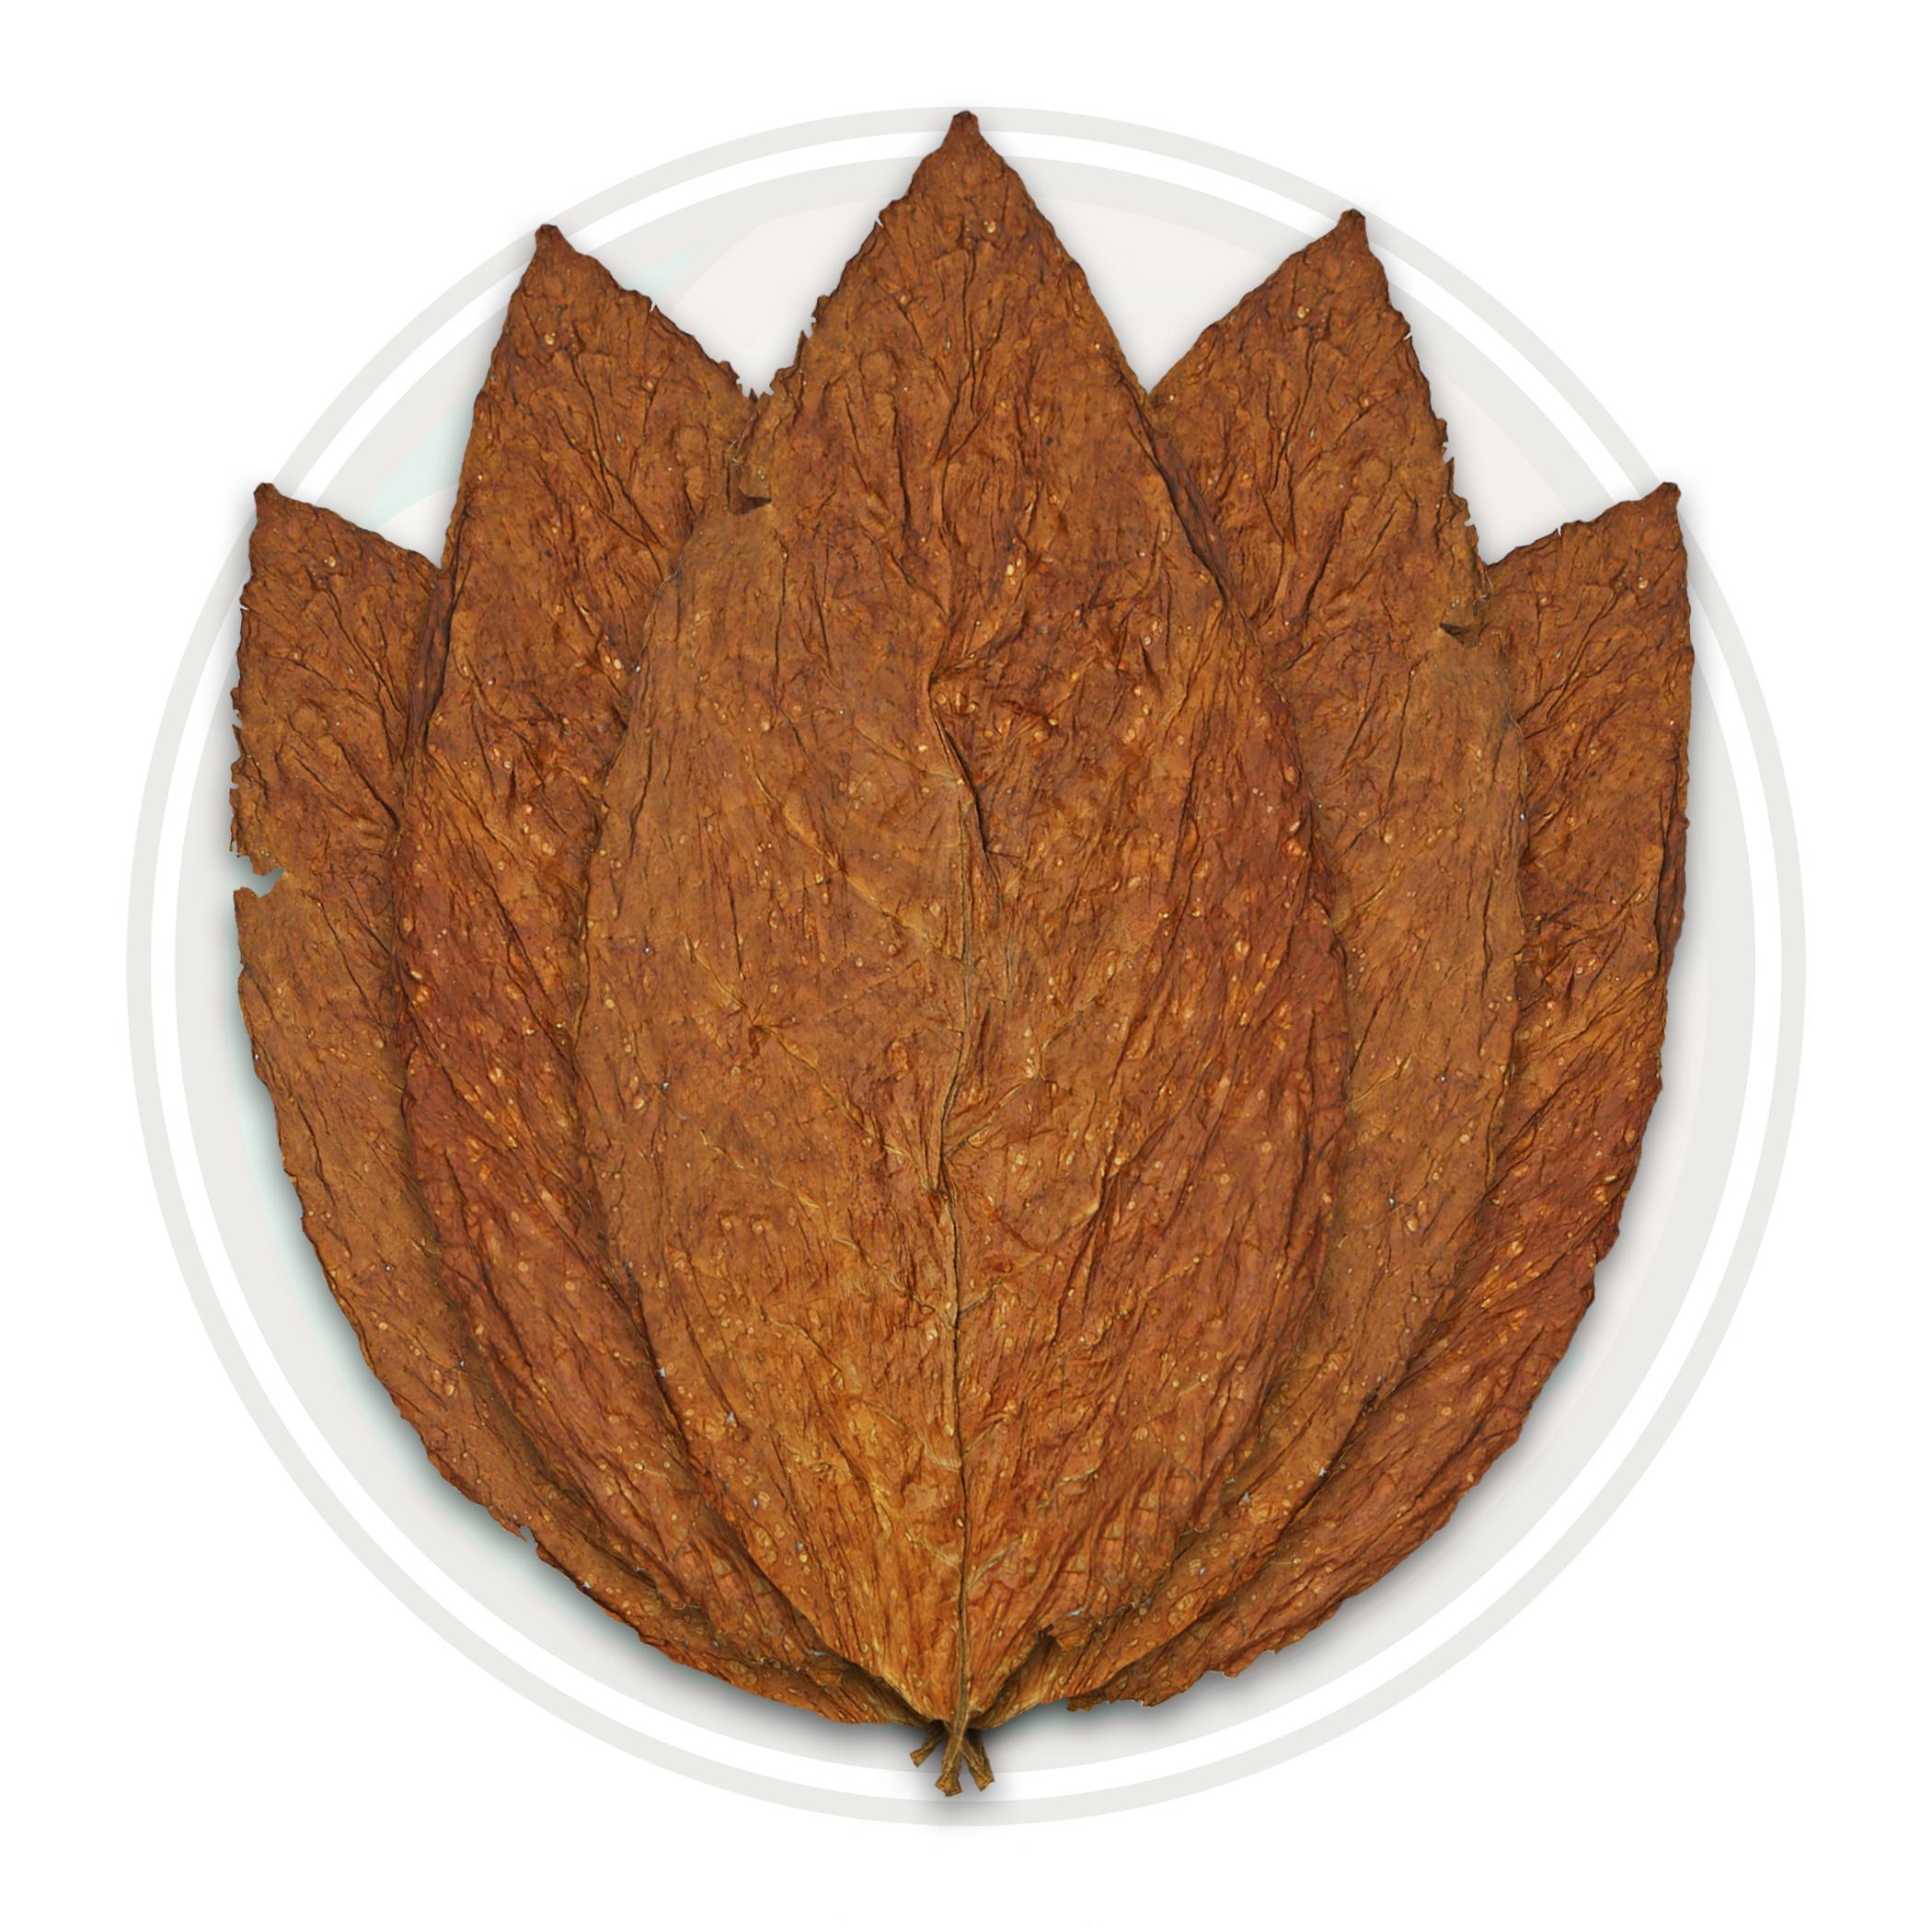 5 Pcs Tobacco Leaves Drying in Organic FREE SHIPPING 